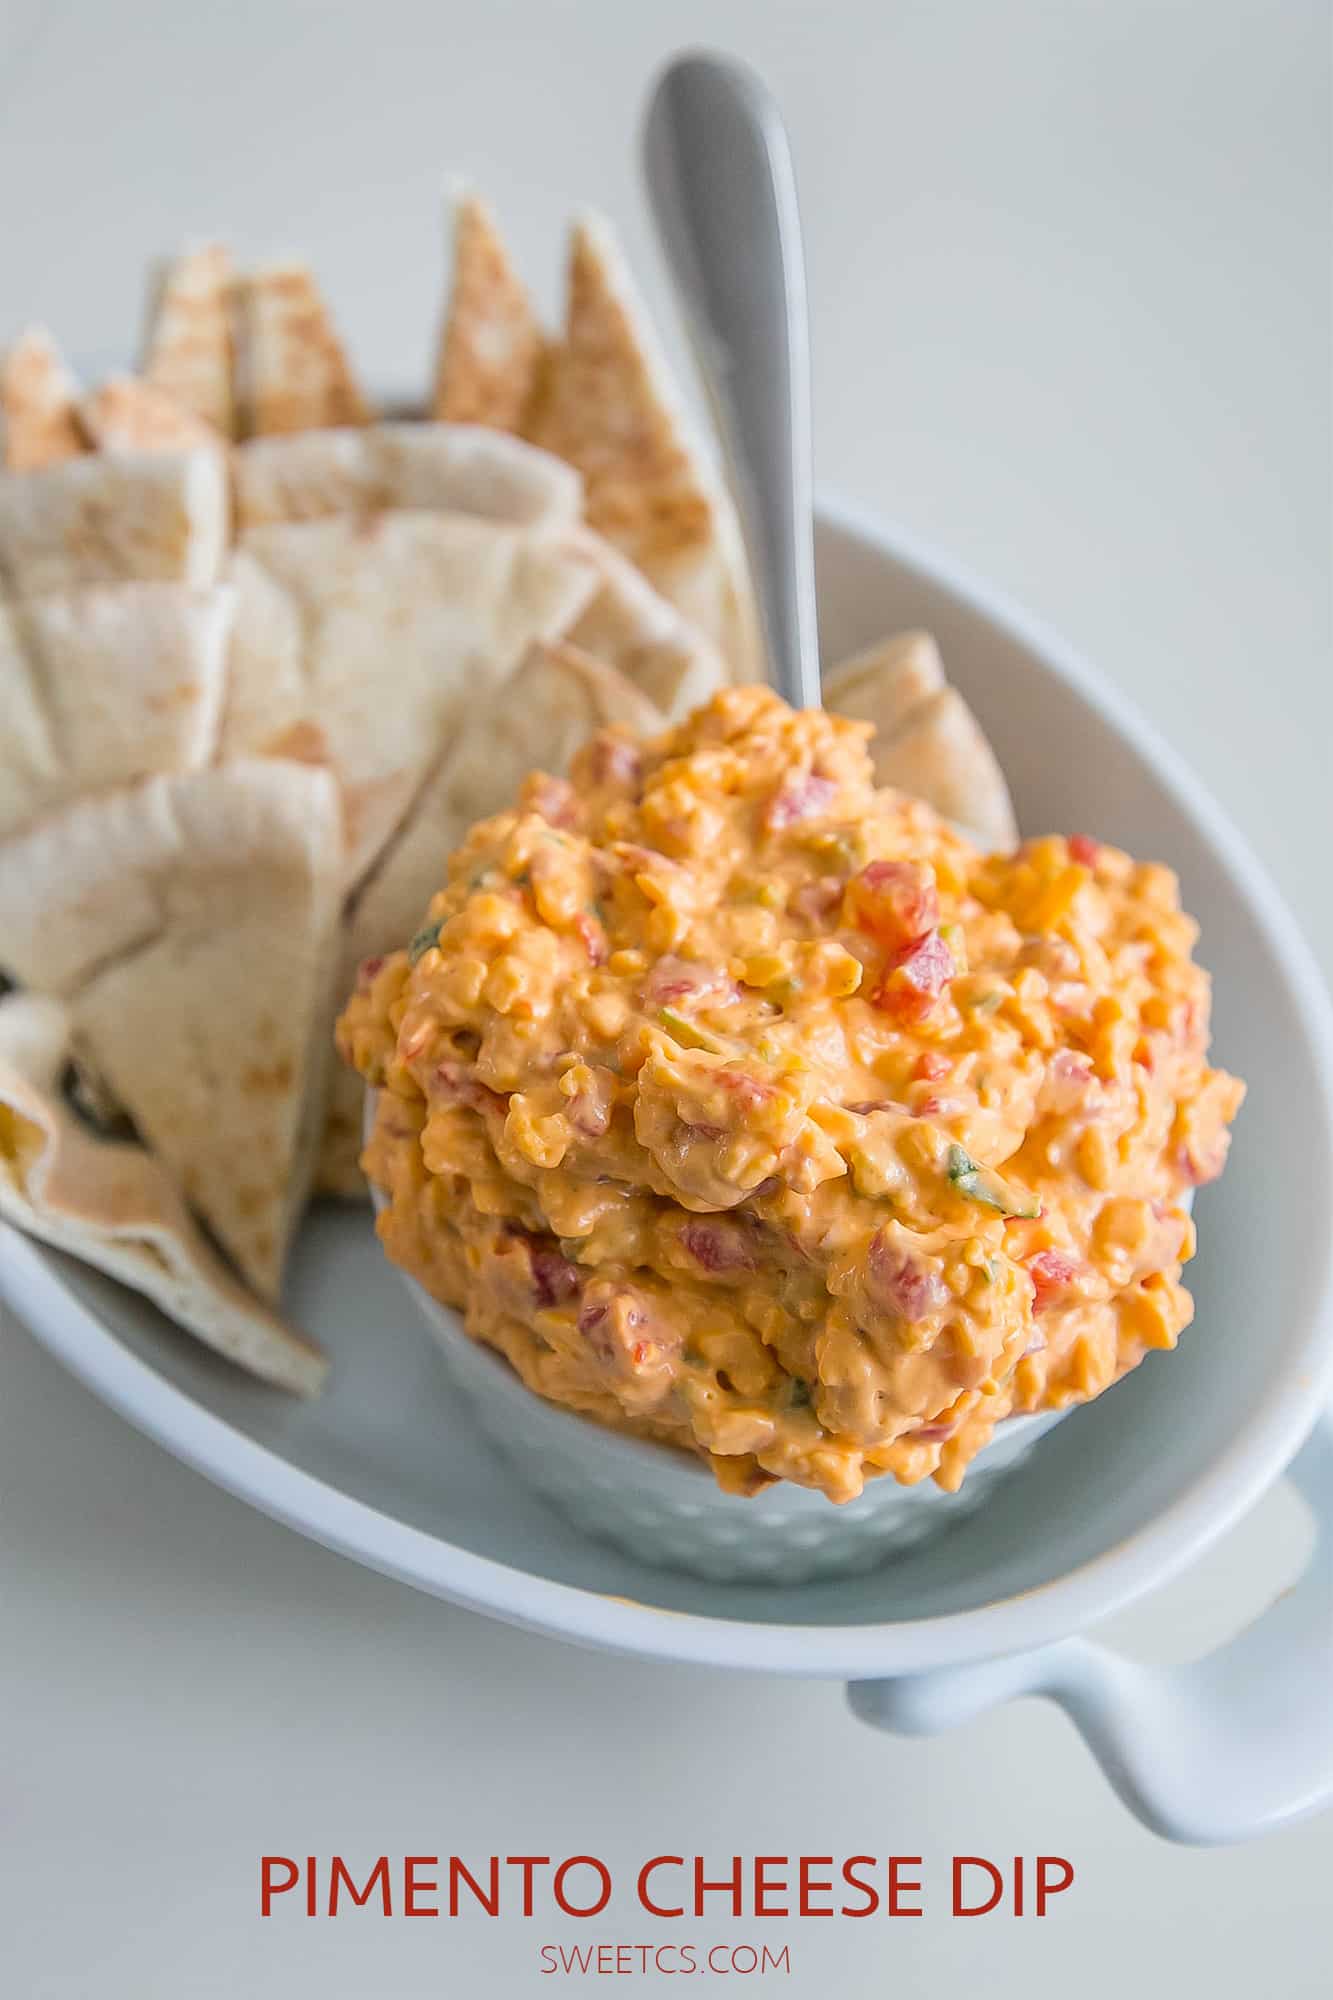 Pimento cheese- I love this southern classic! It is so creamy and delicious!